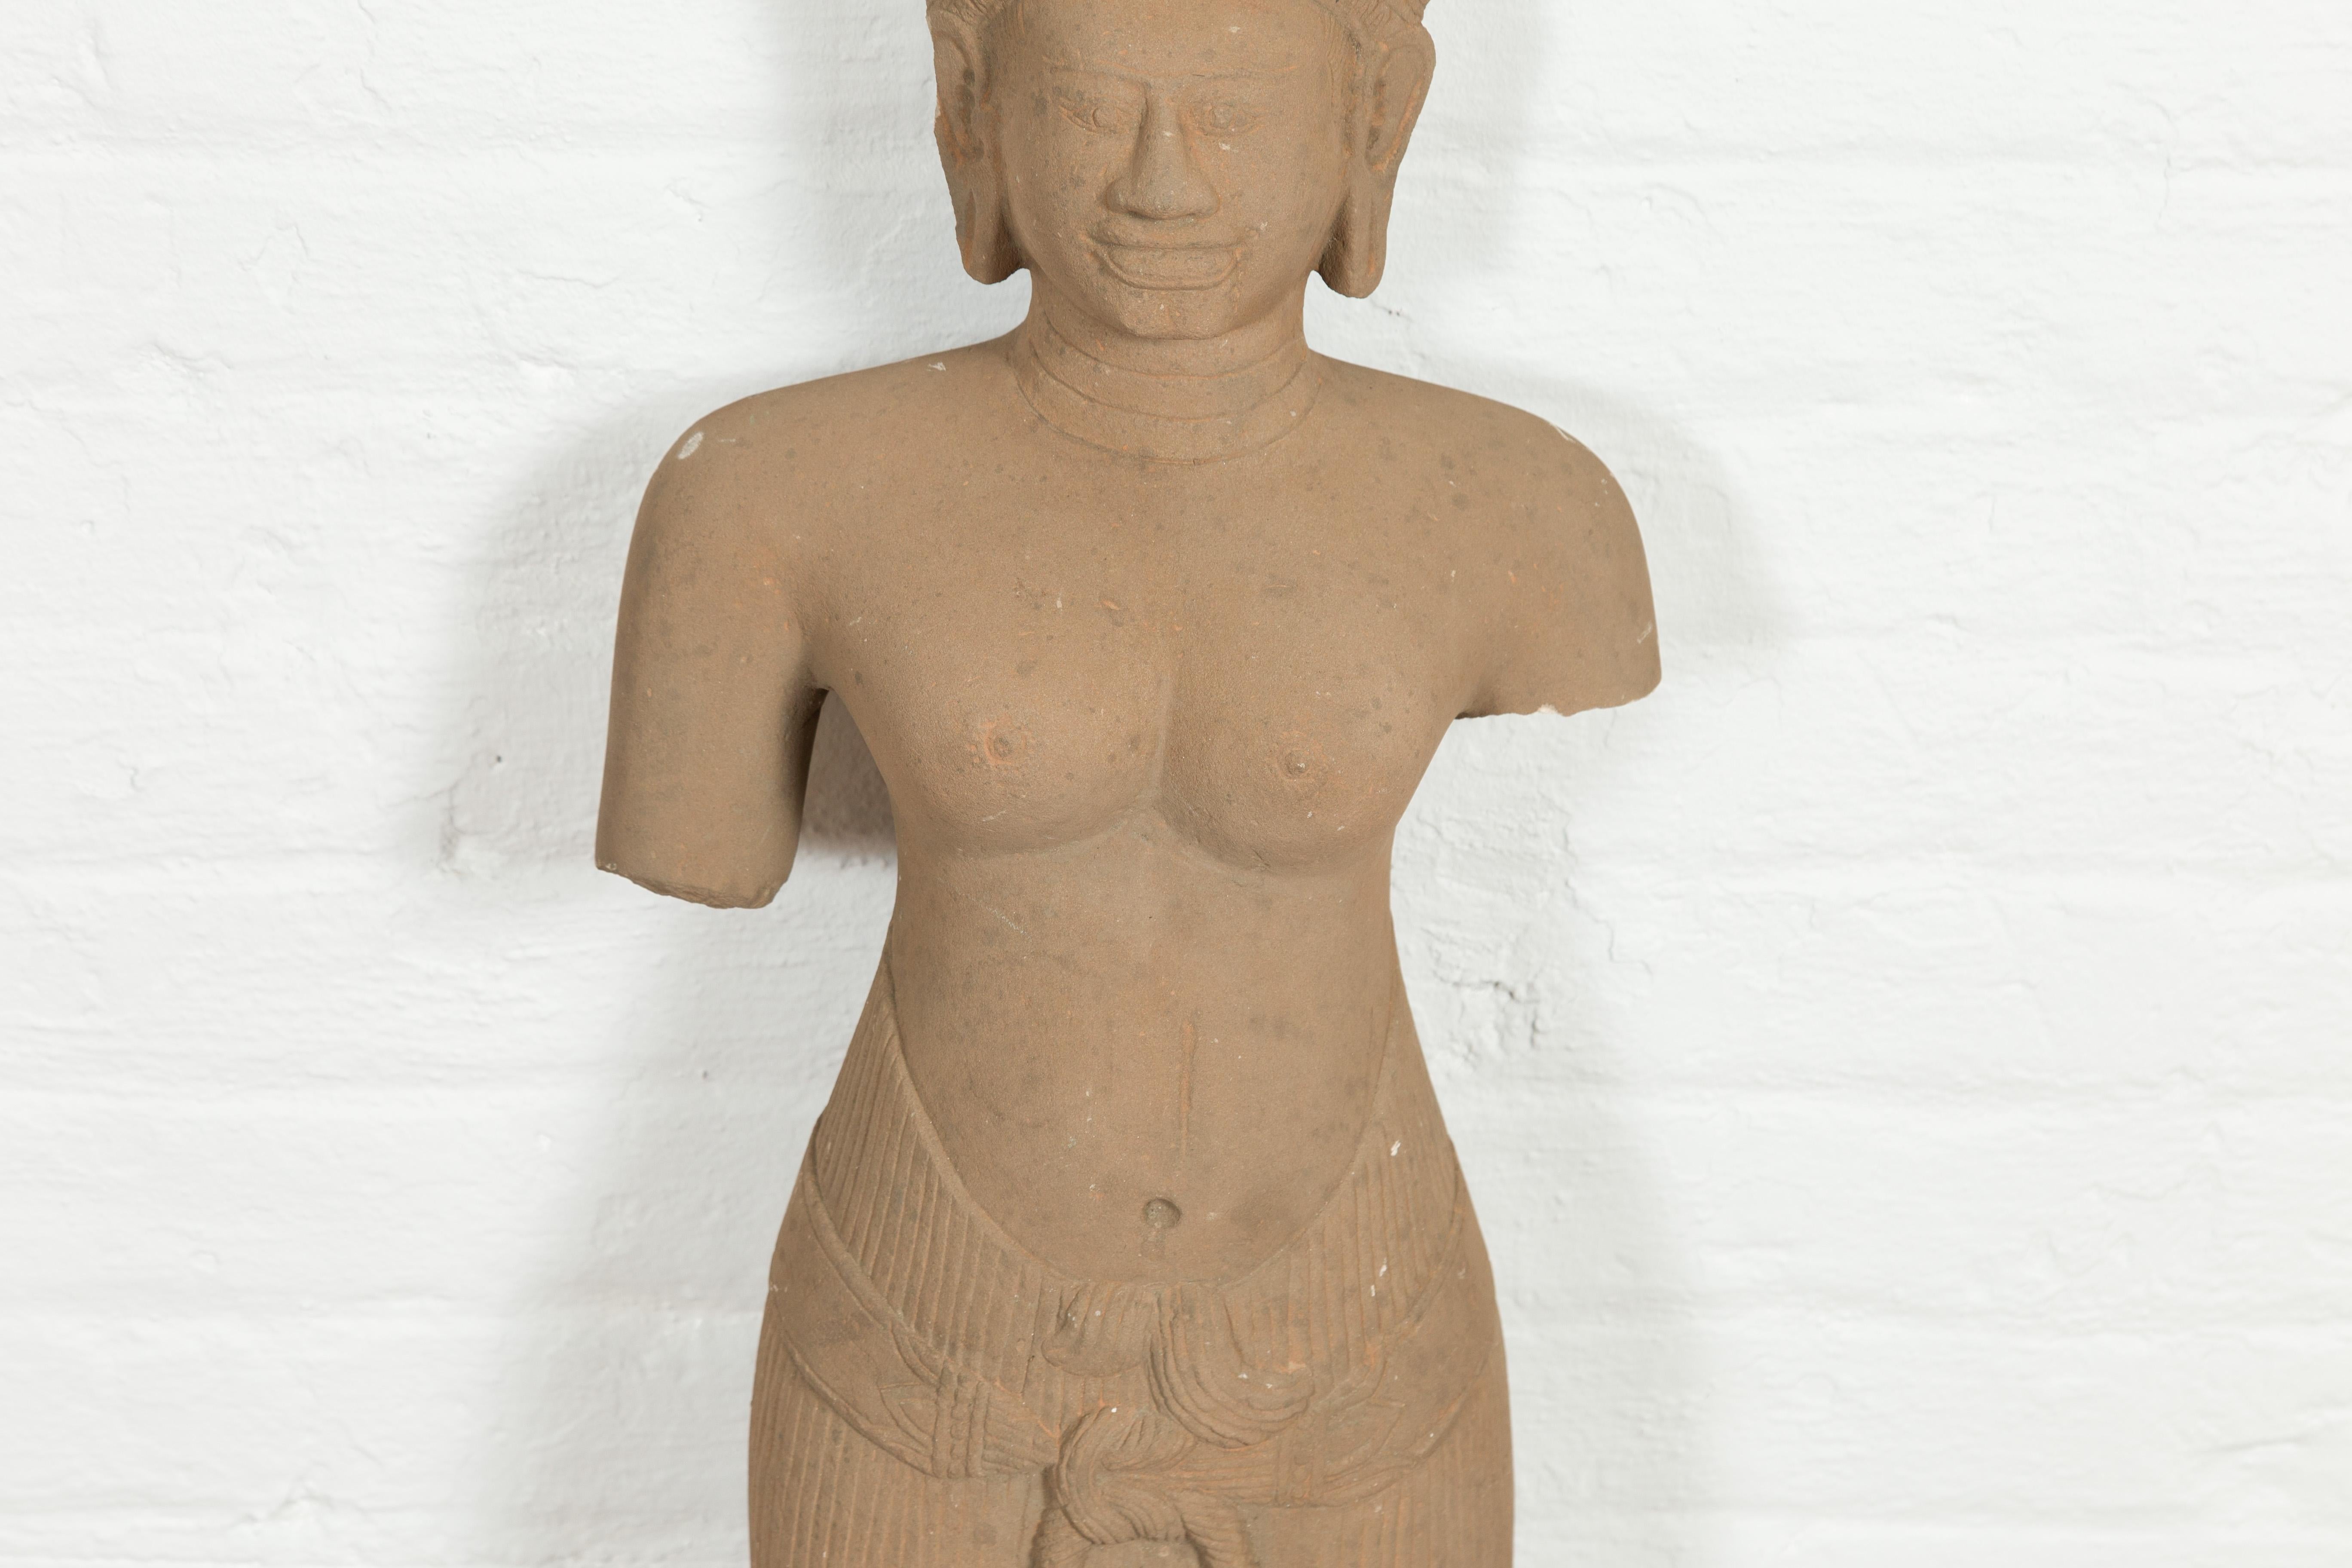 20th Century Cambodian Carved Stone Female Deity Bare-Chested Statue with Ornate Headdress